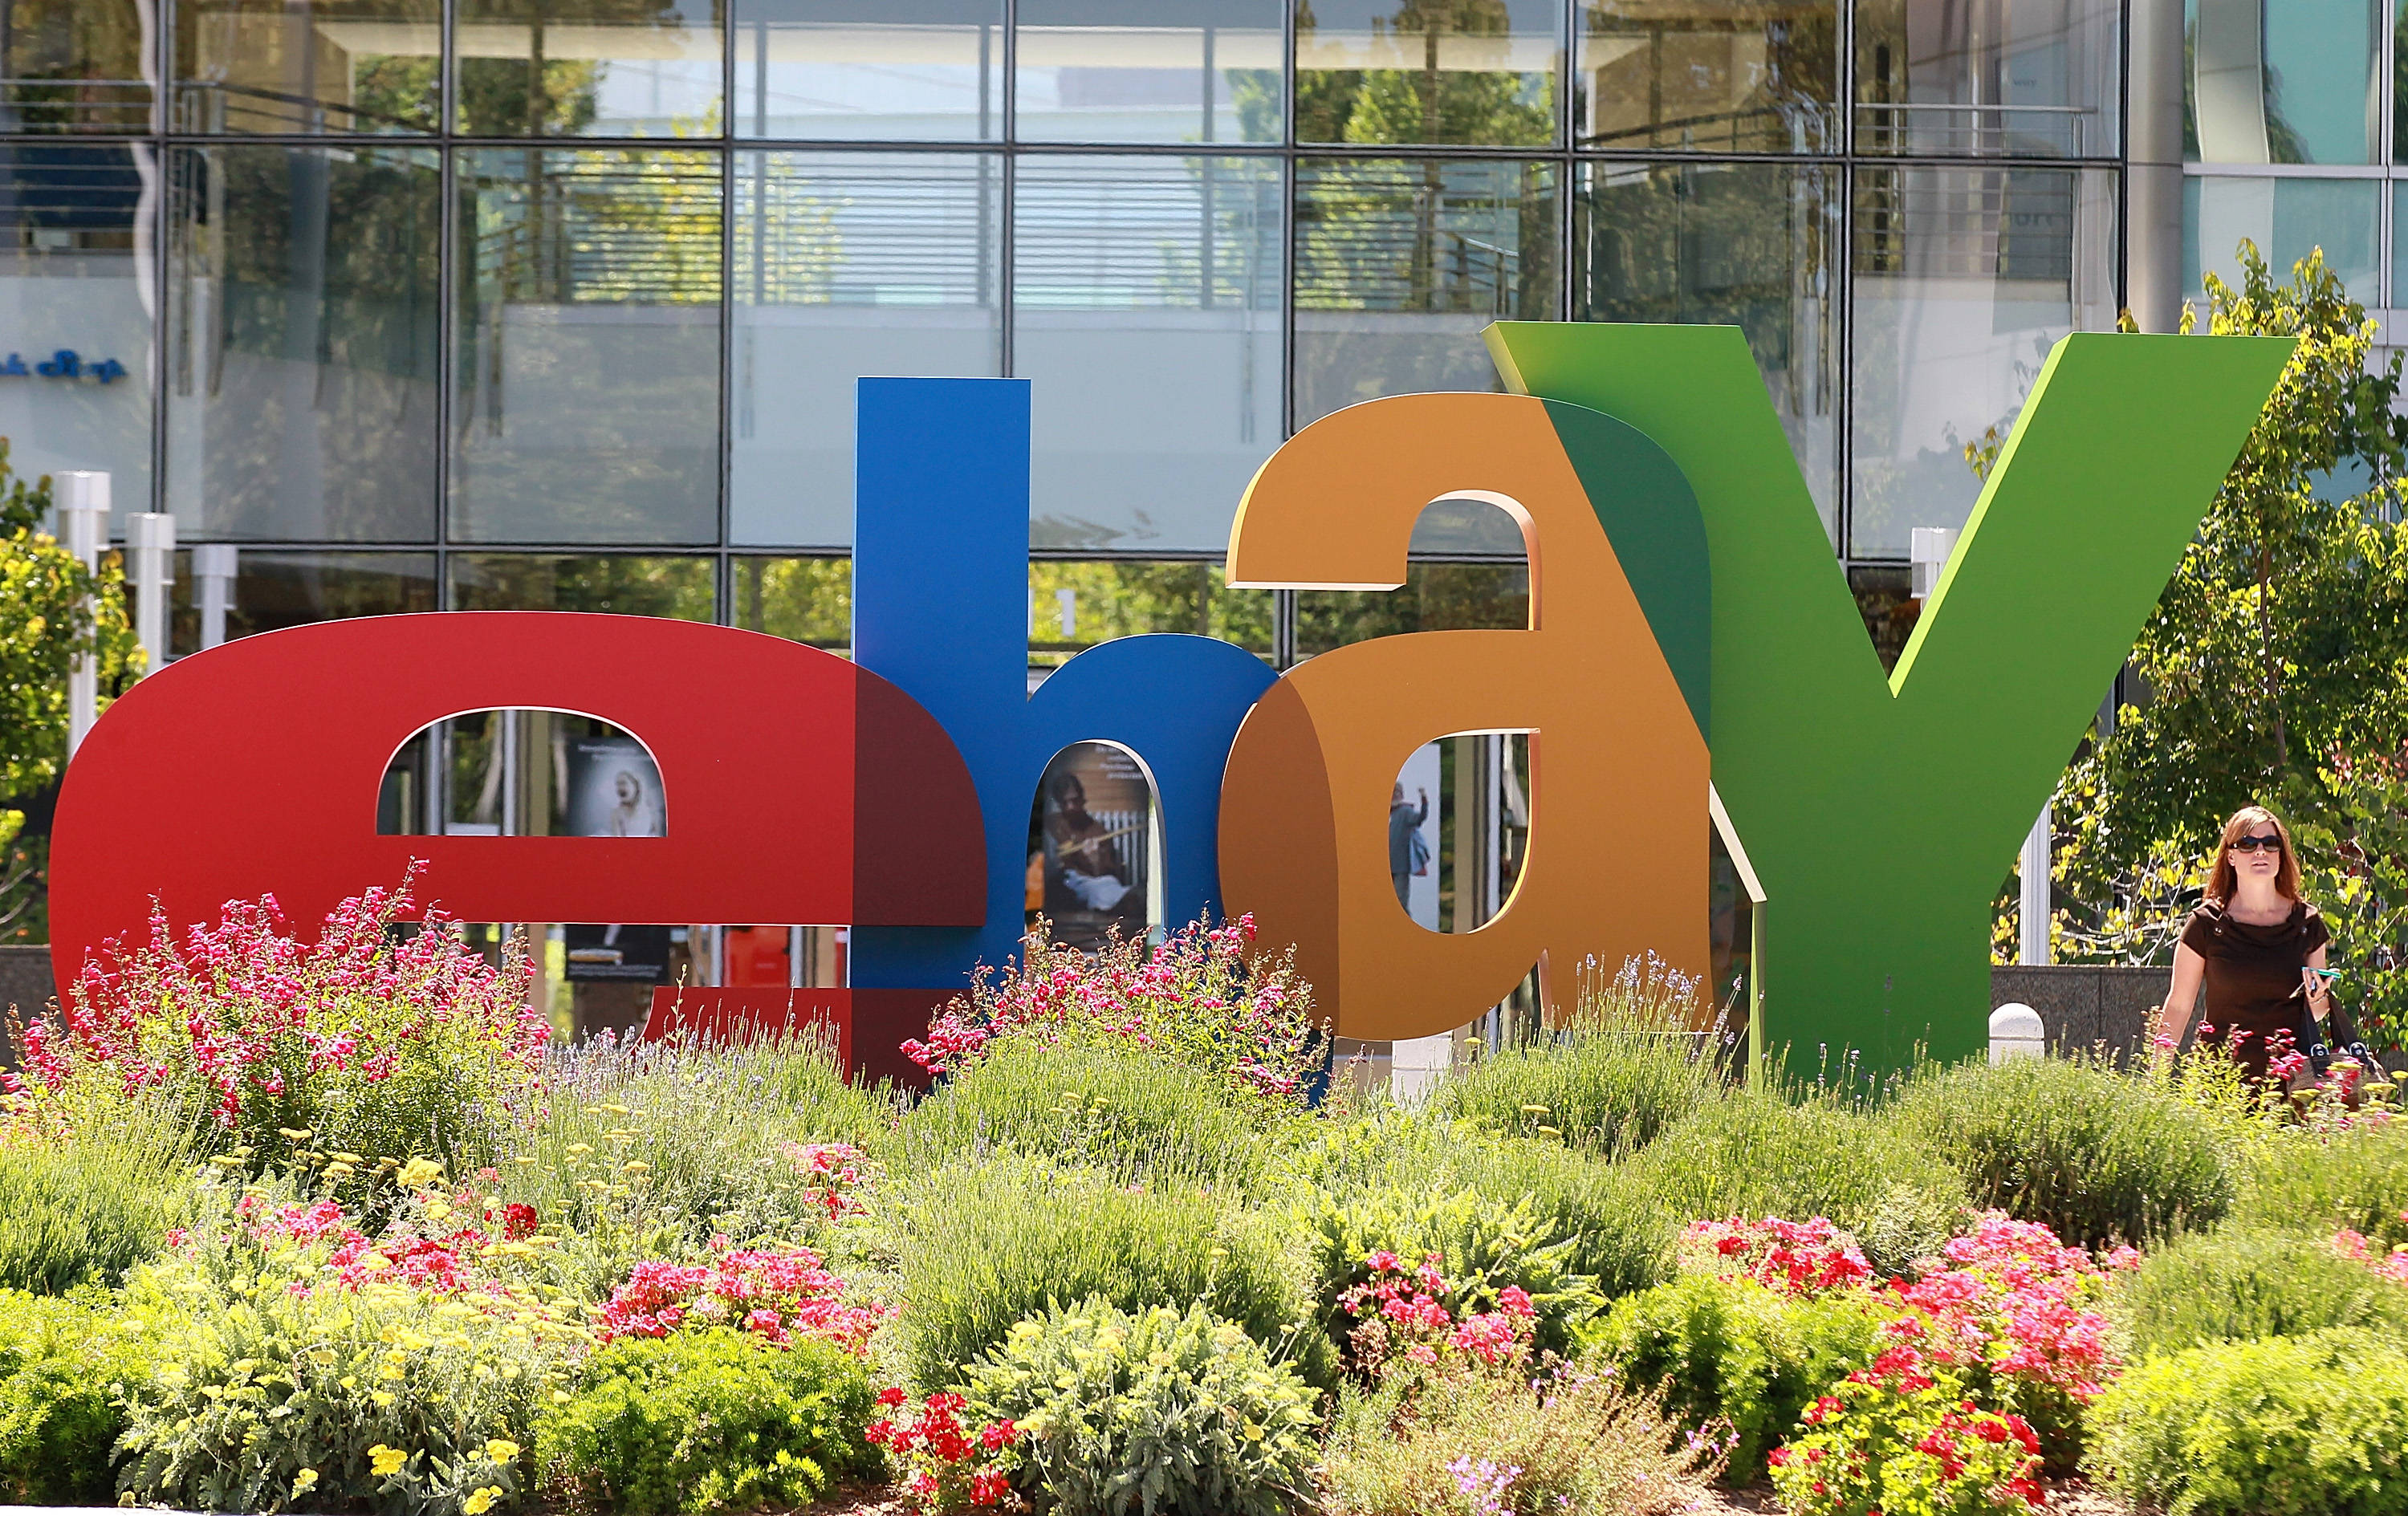 eBay Forecasts Continued Growth for the Next Three Years